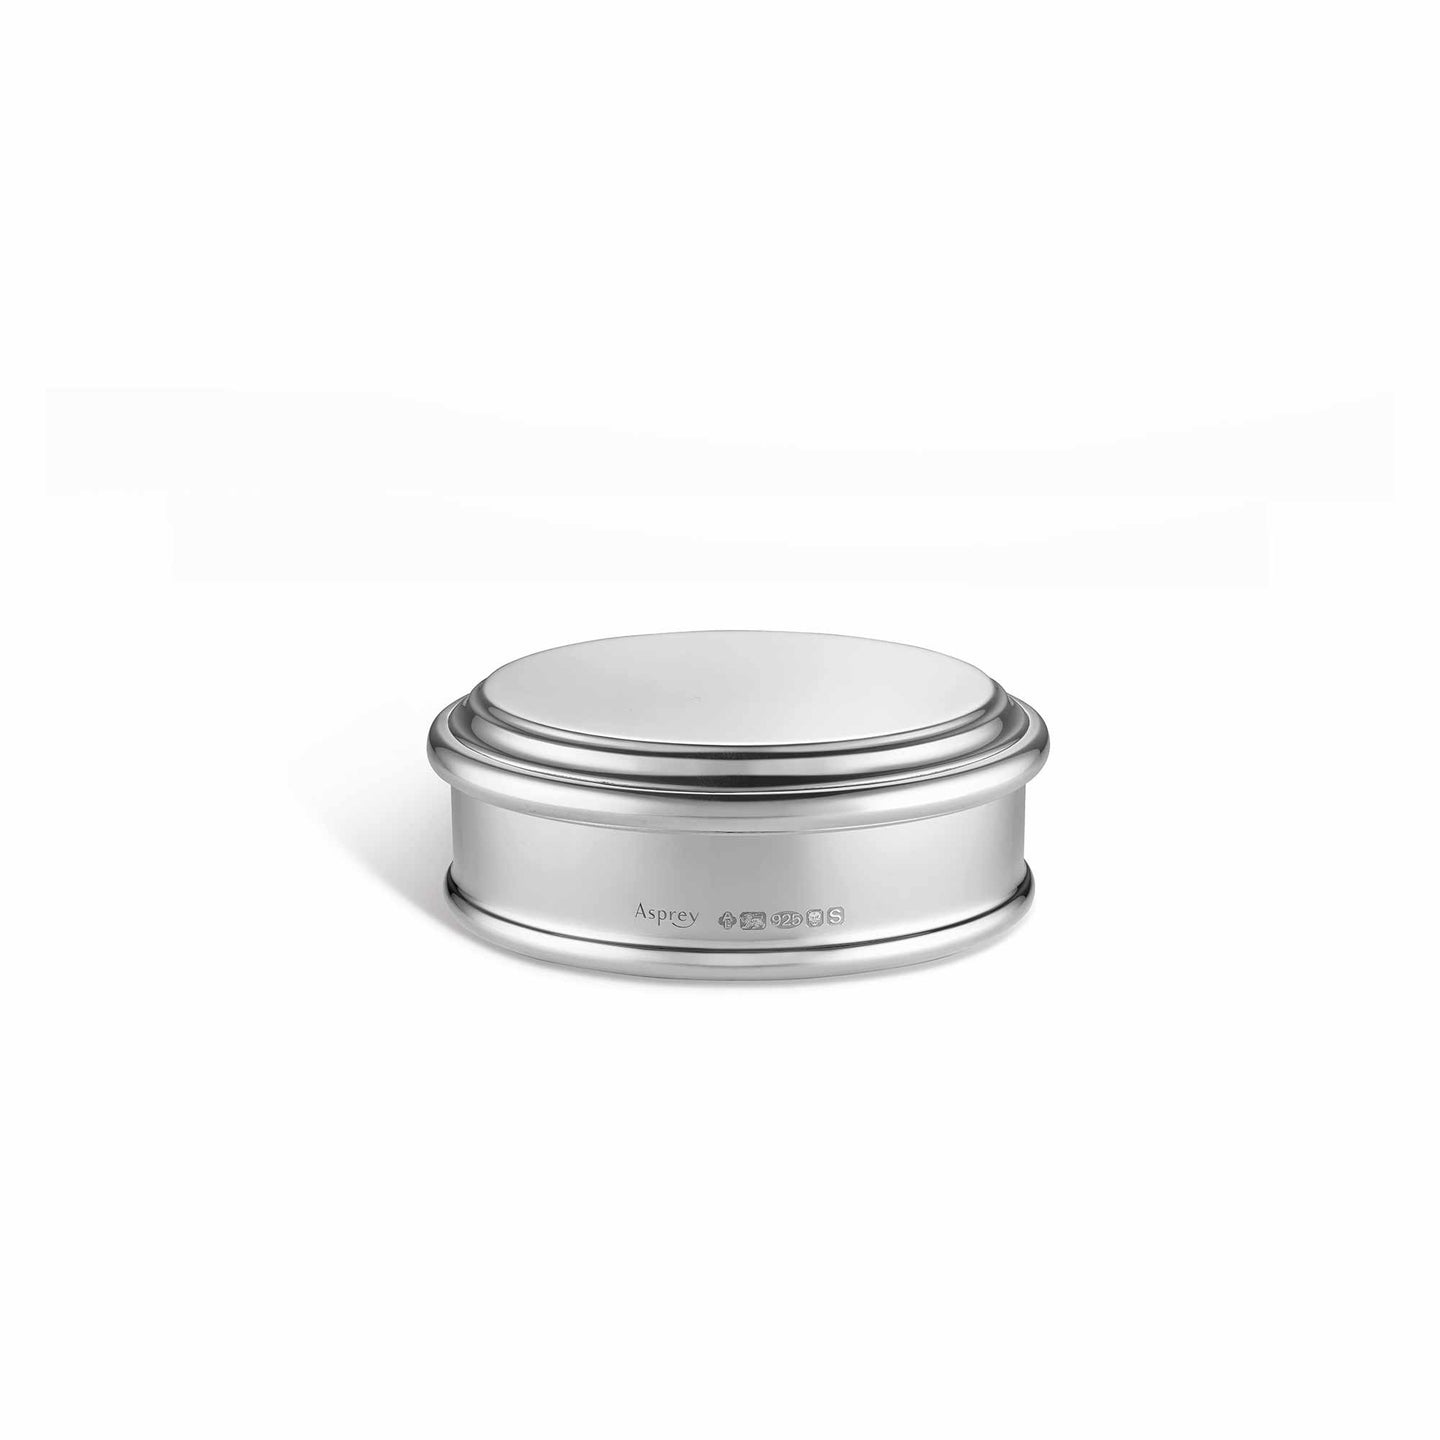 Round Raleigh Box in Sterling Silver, Small